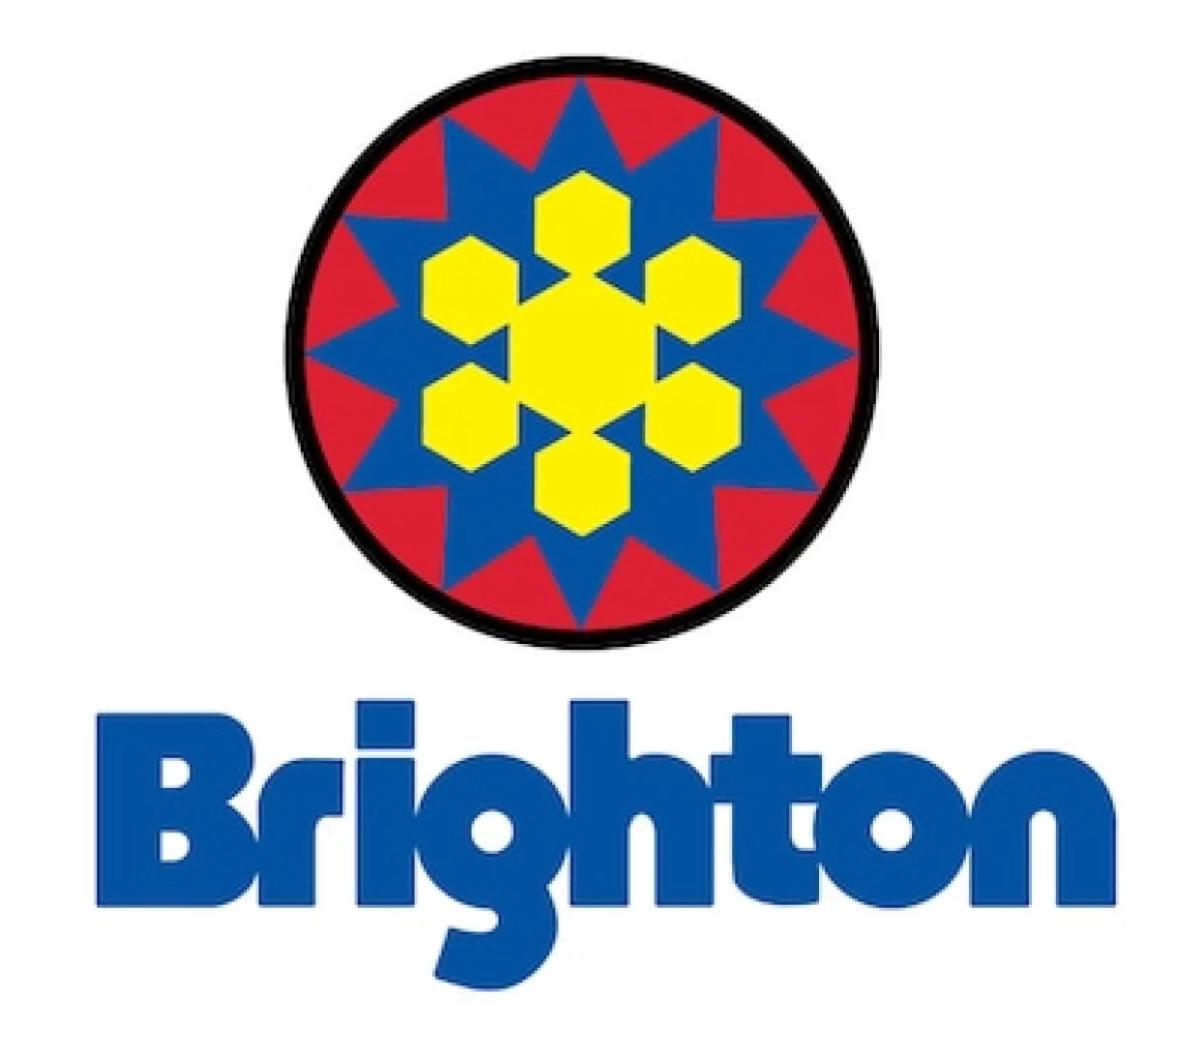 Red, Blue, and Yellow stylized snowflake logo with Brighton underneath